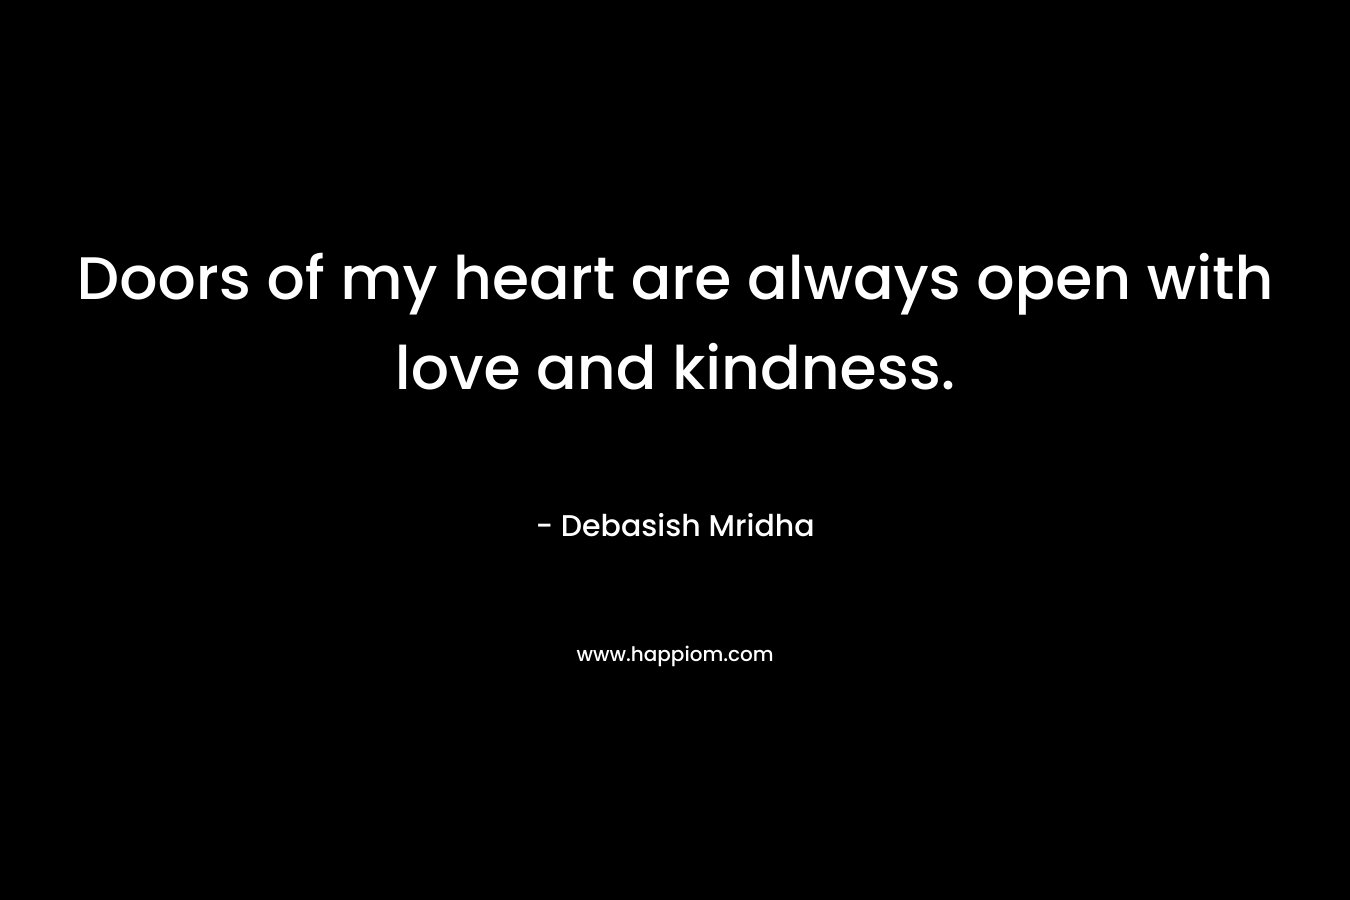 Doors of my heart are always open with love and kindness. – Debasish Mridha